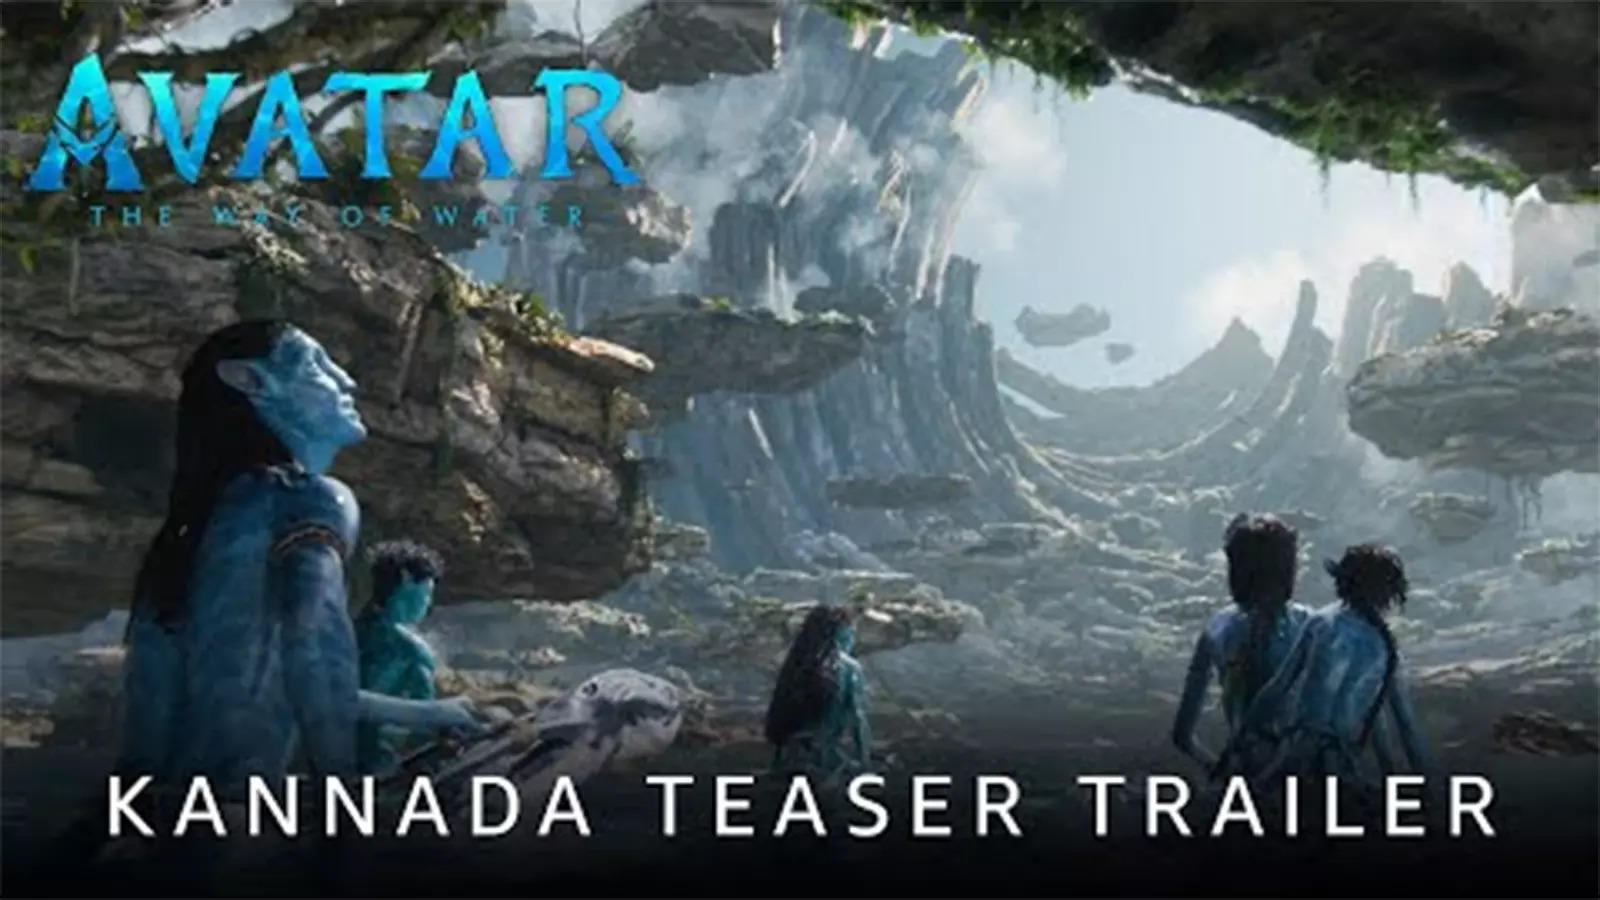 Avatar ReRelease  Official Trailer  YouTube